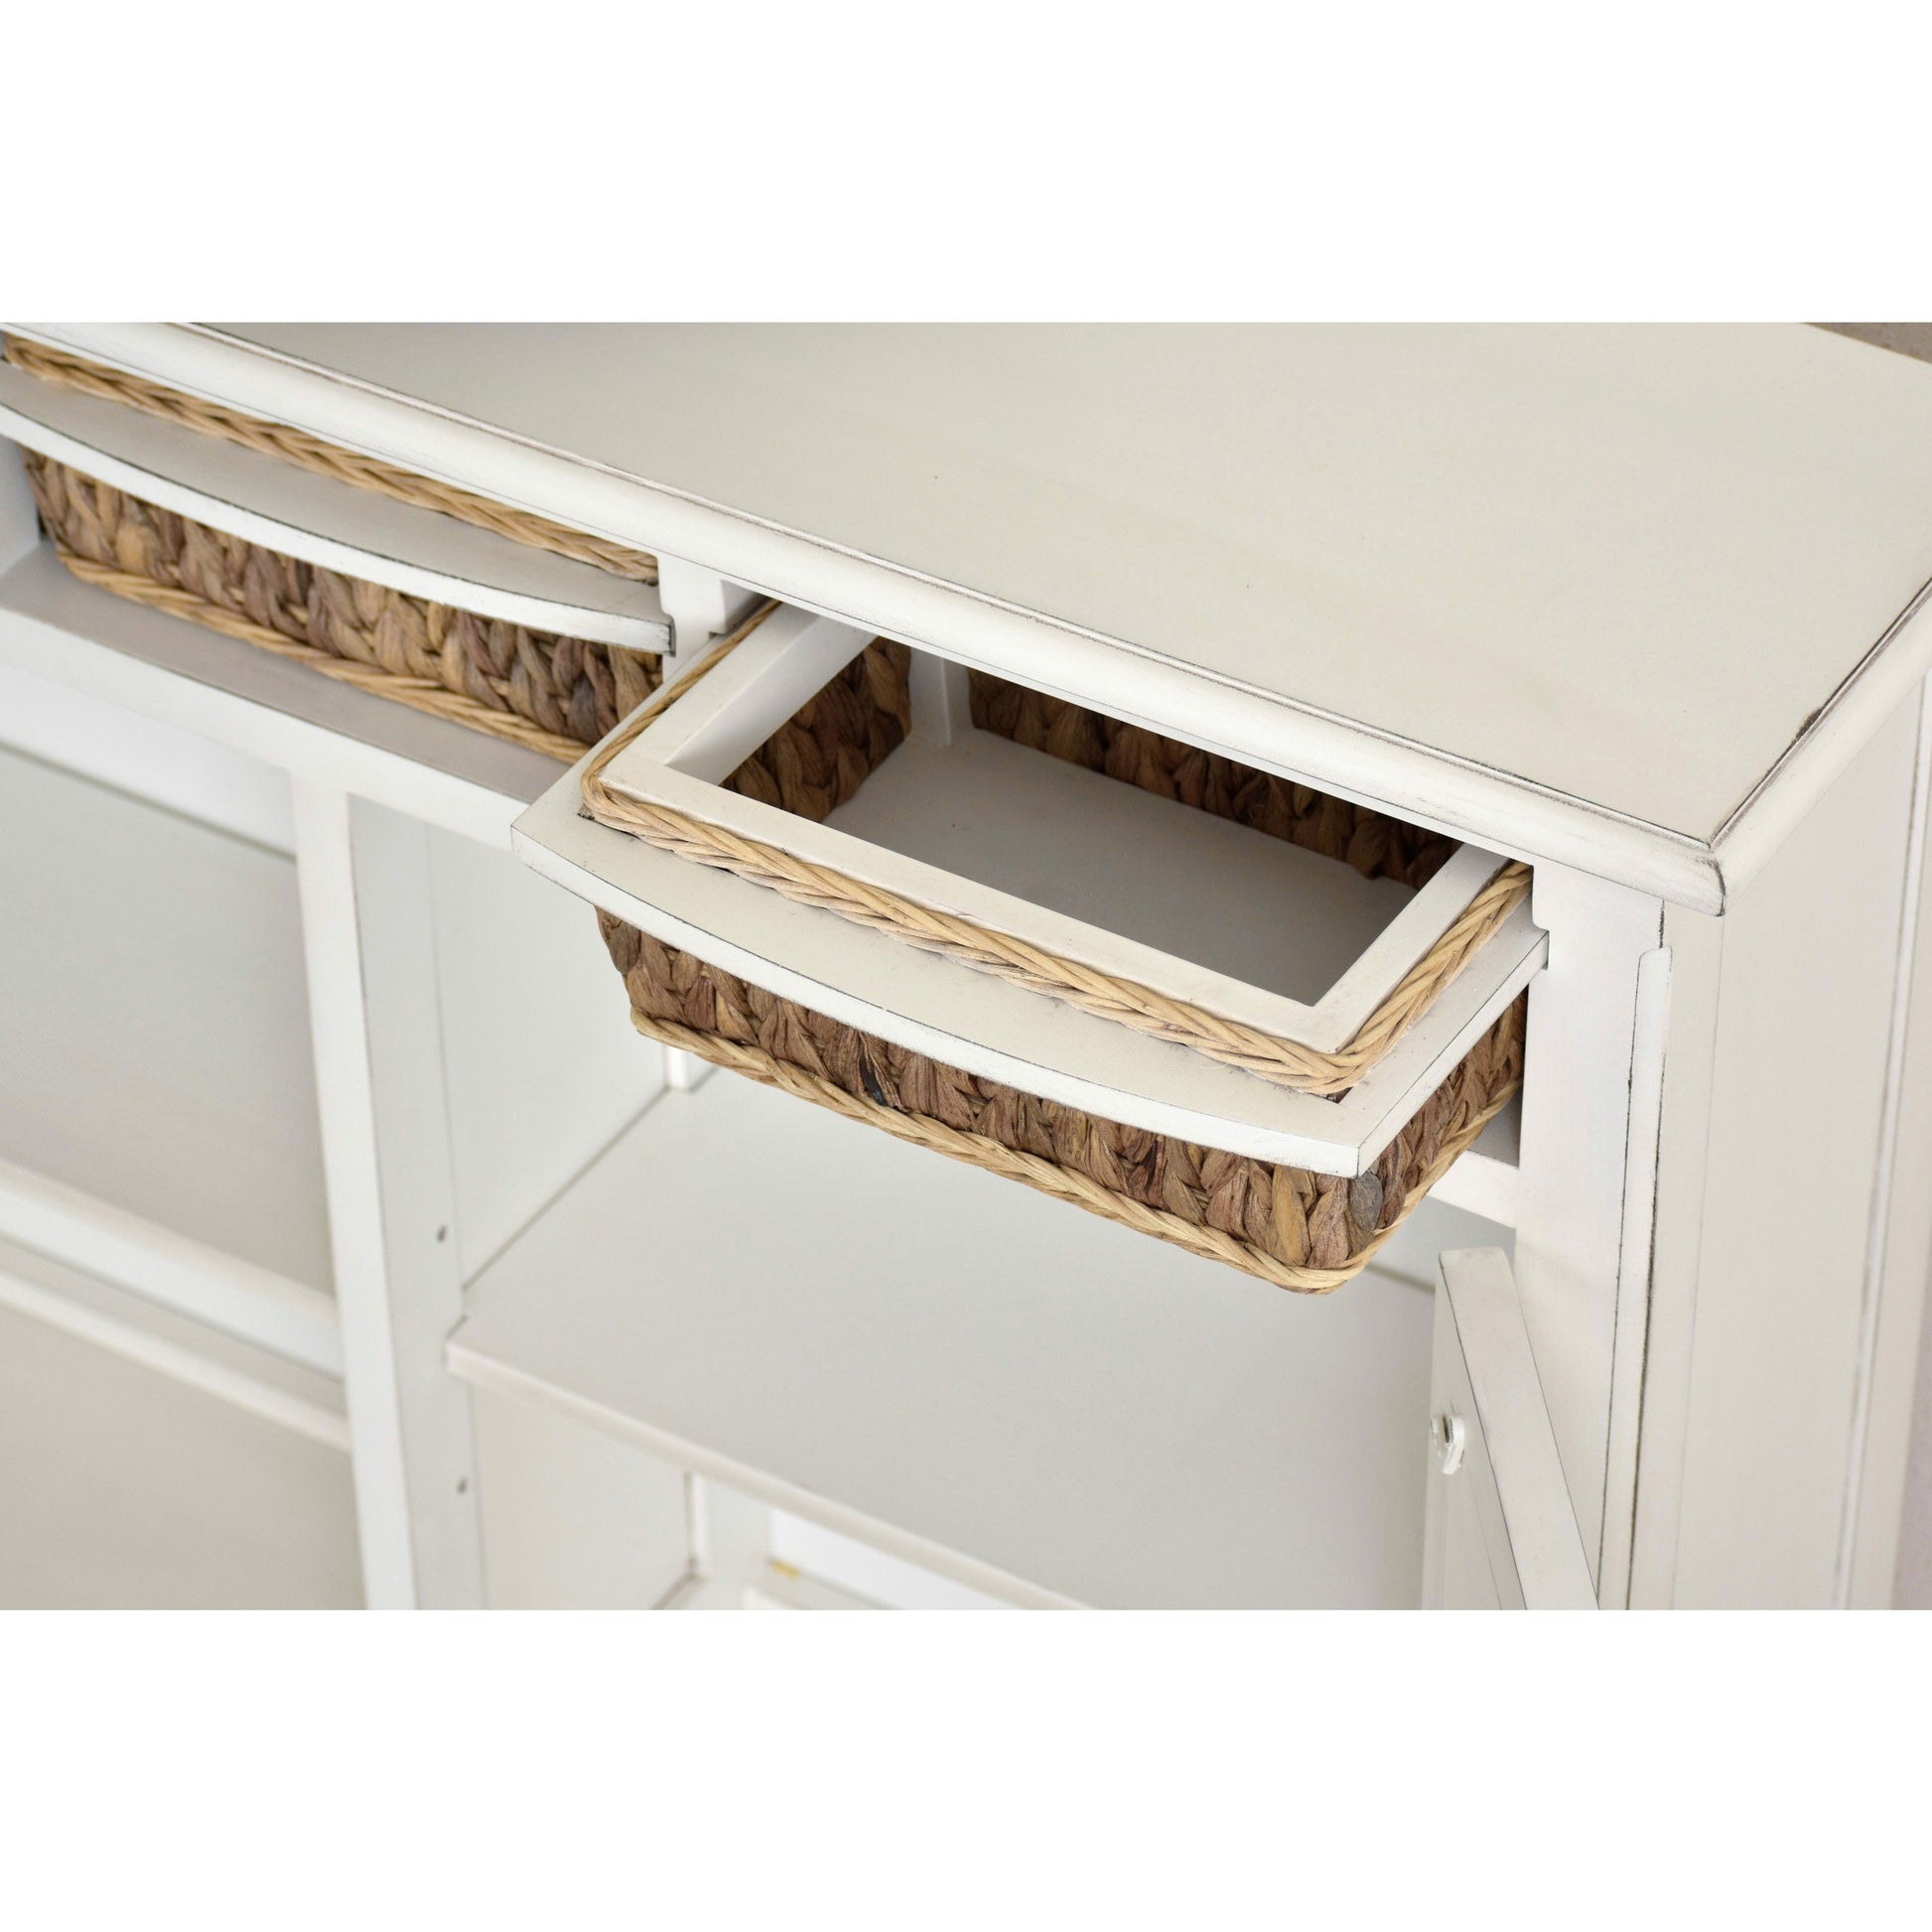 Sea Winds Trading Monaco Entry Cabinets with Baskets B81822 Indoor Sea Winds Trading Co 